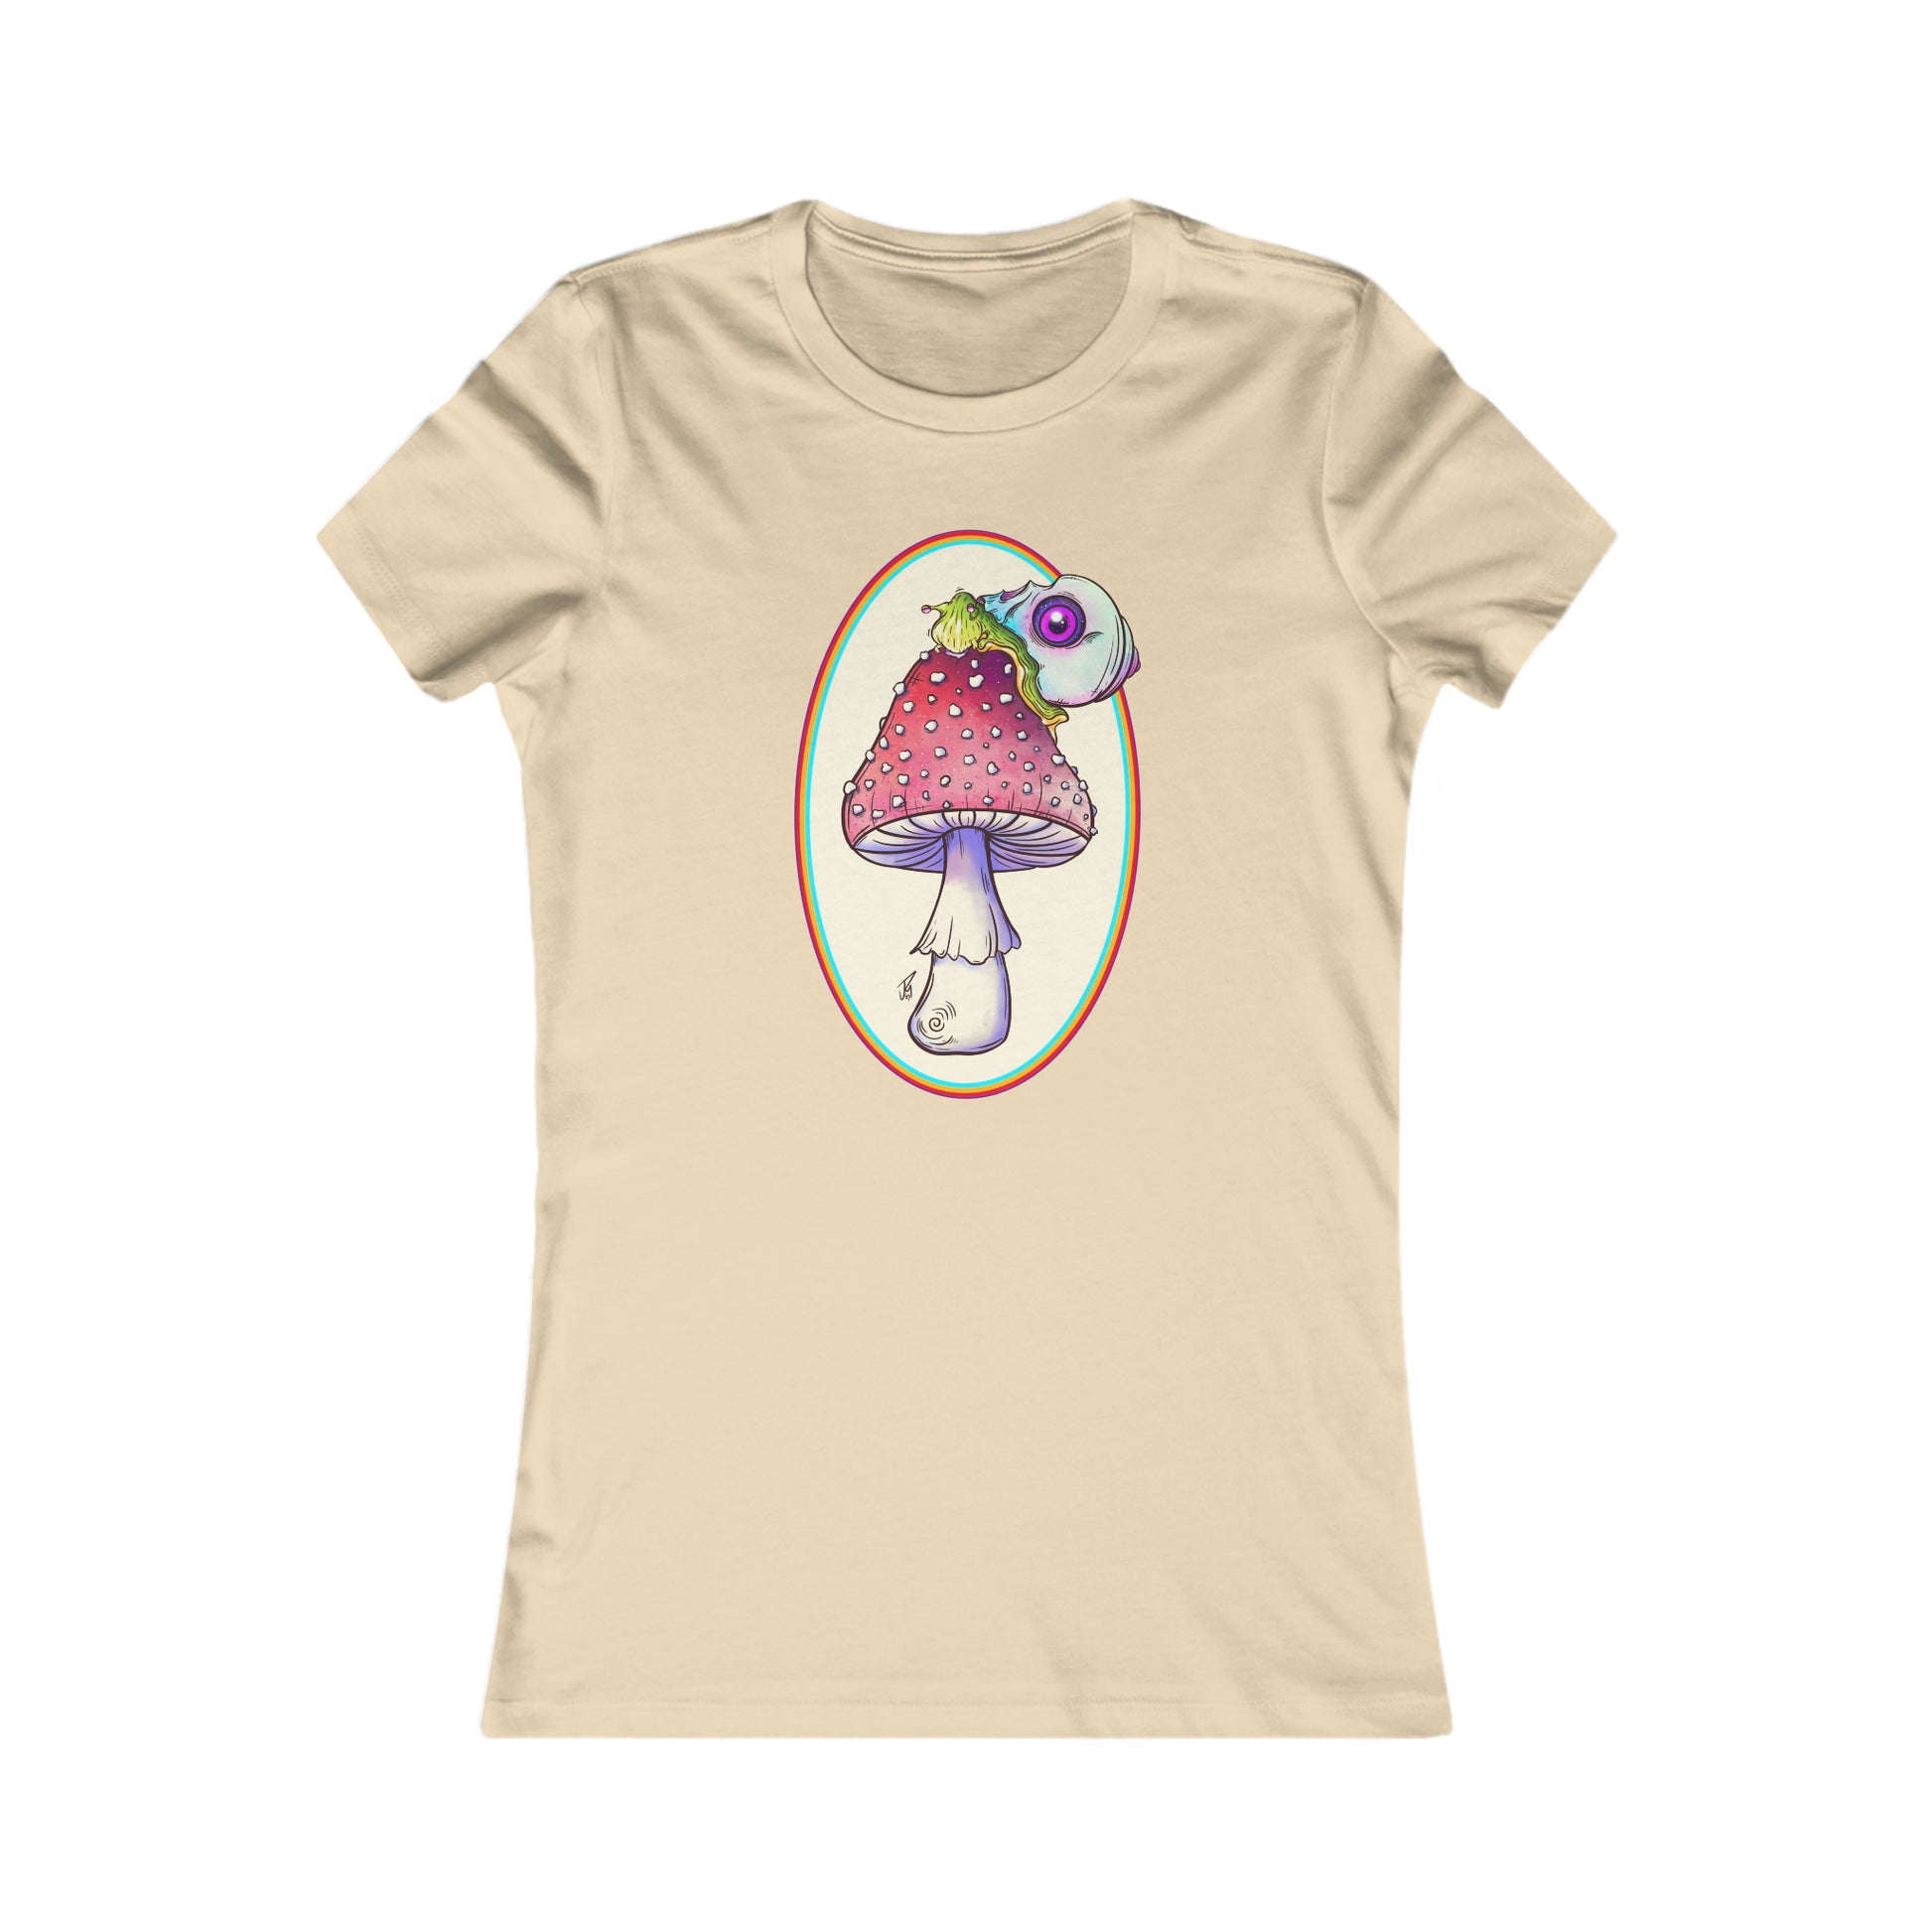 Food For Thought Women's Tee T-Shirt Printify S Soft Cream 